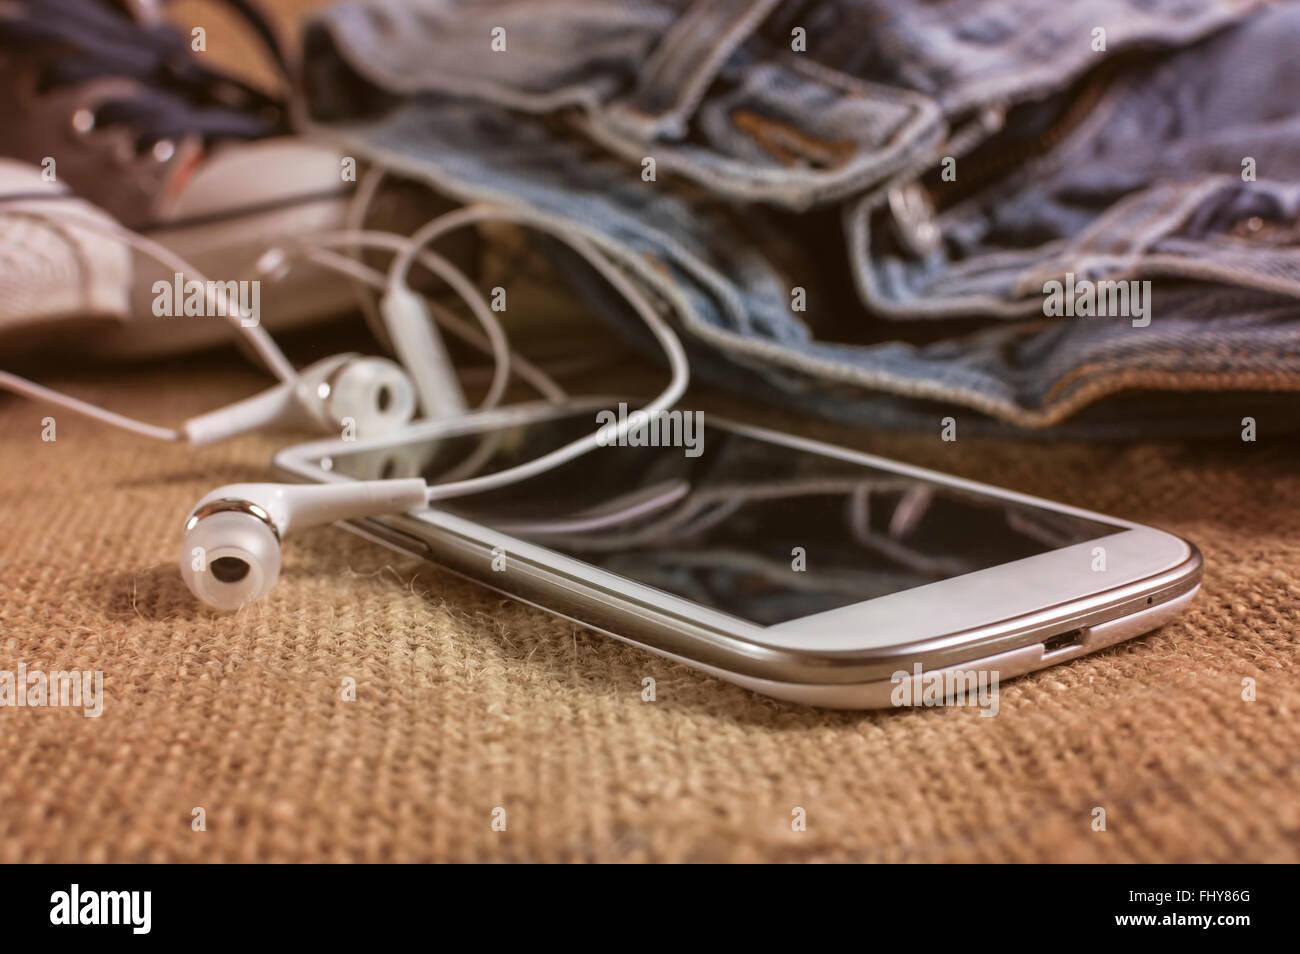 Smart phone on a table cloth with pants and sneakers. Shallow depth of field. Stock Photo